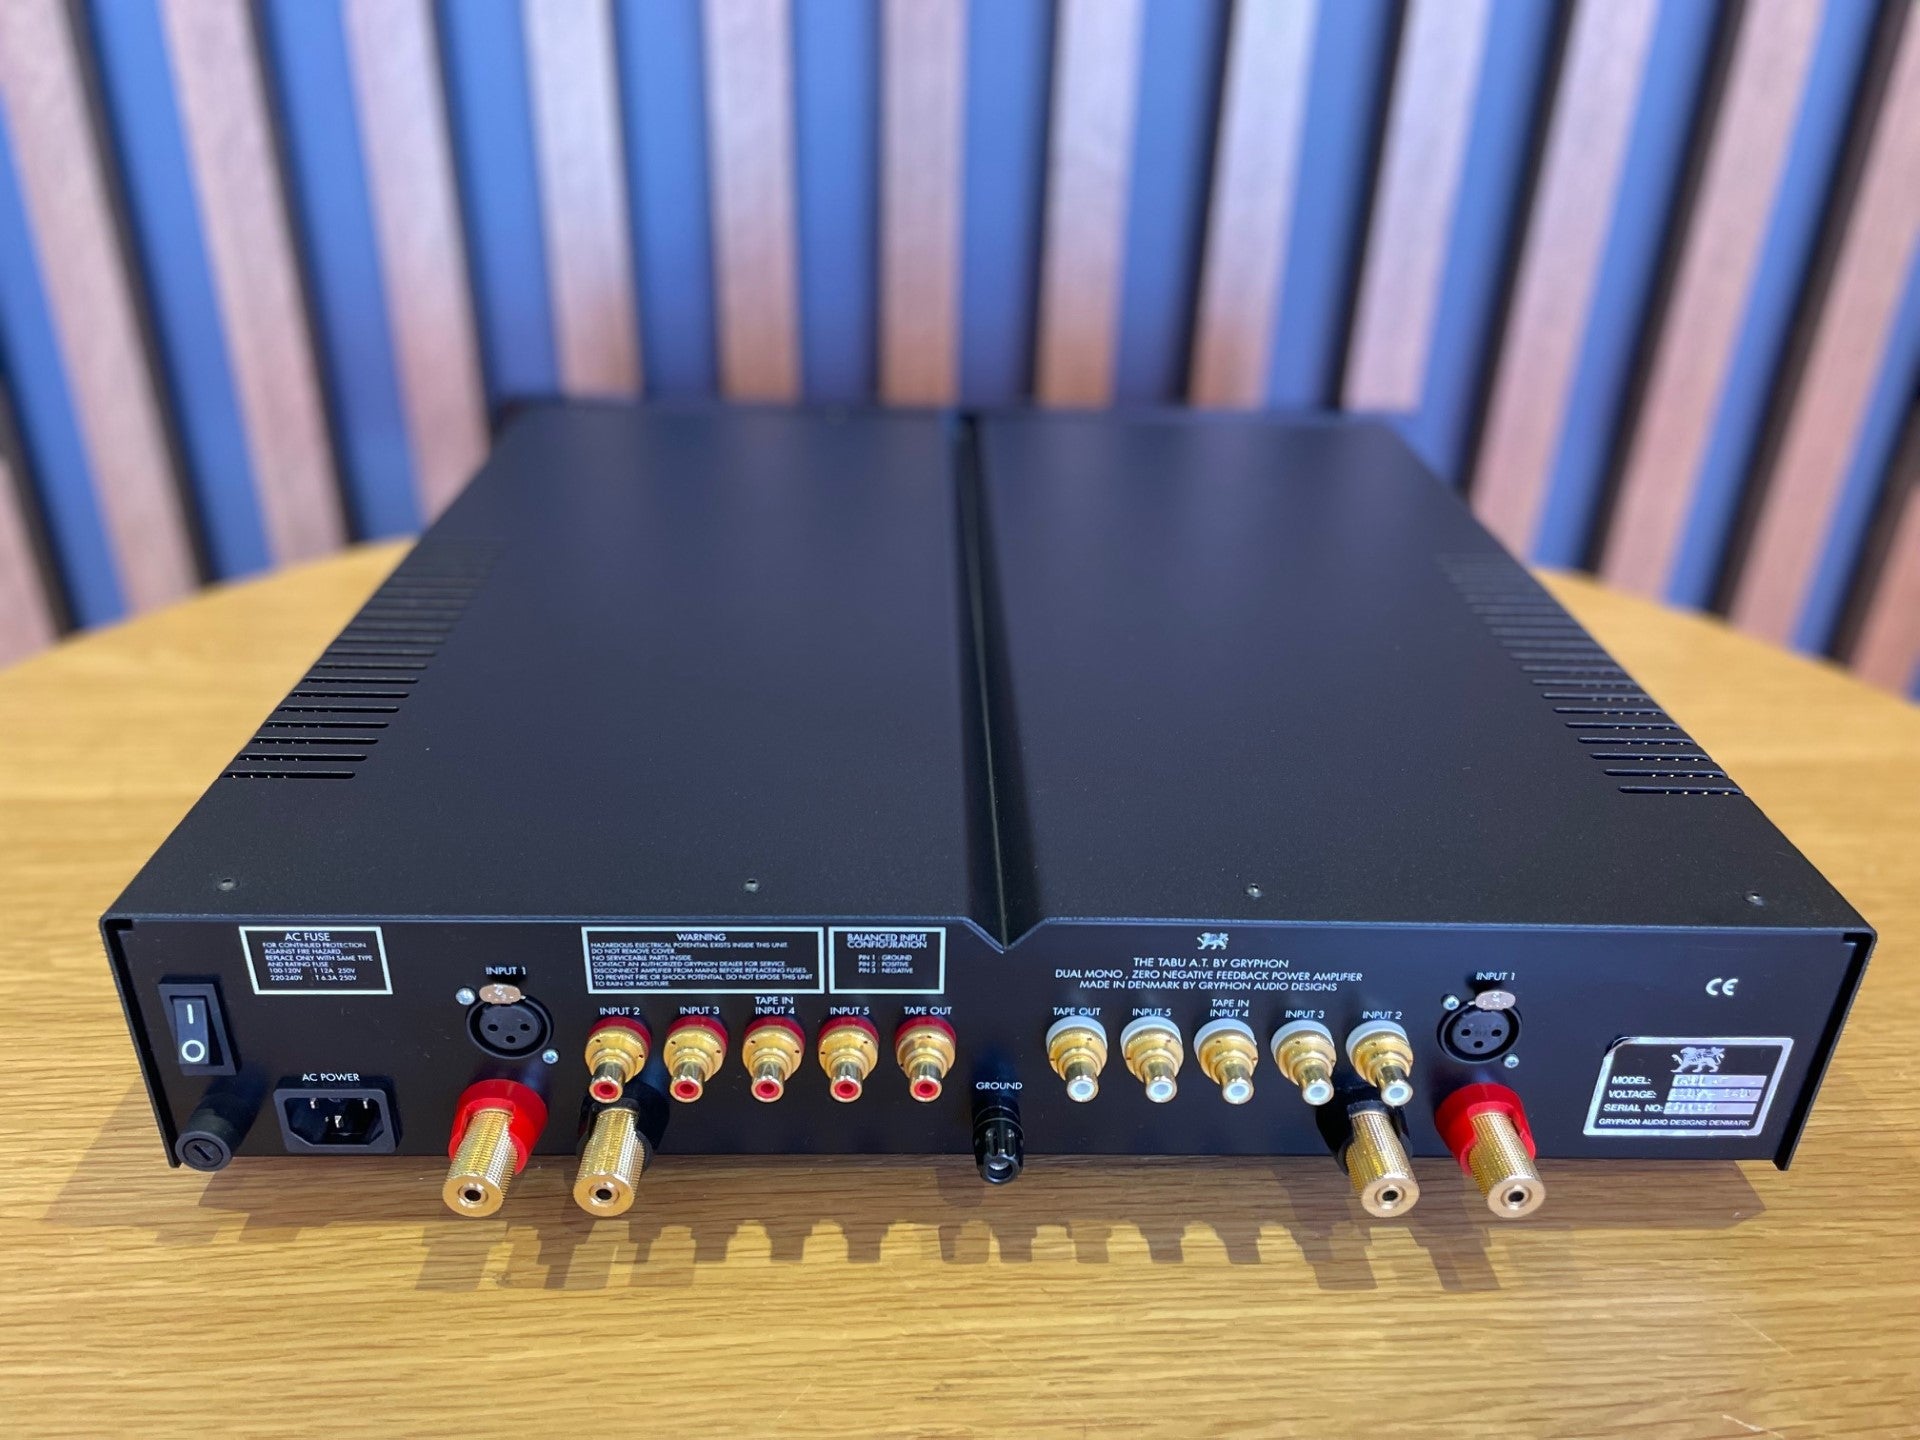 Gryphon Tabu AT Dual Mono Integrated Amplifier - As Traded